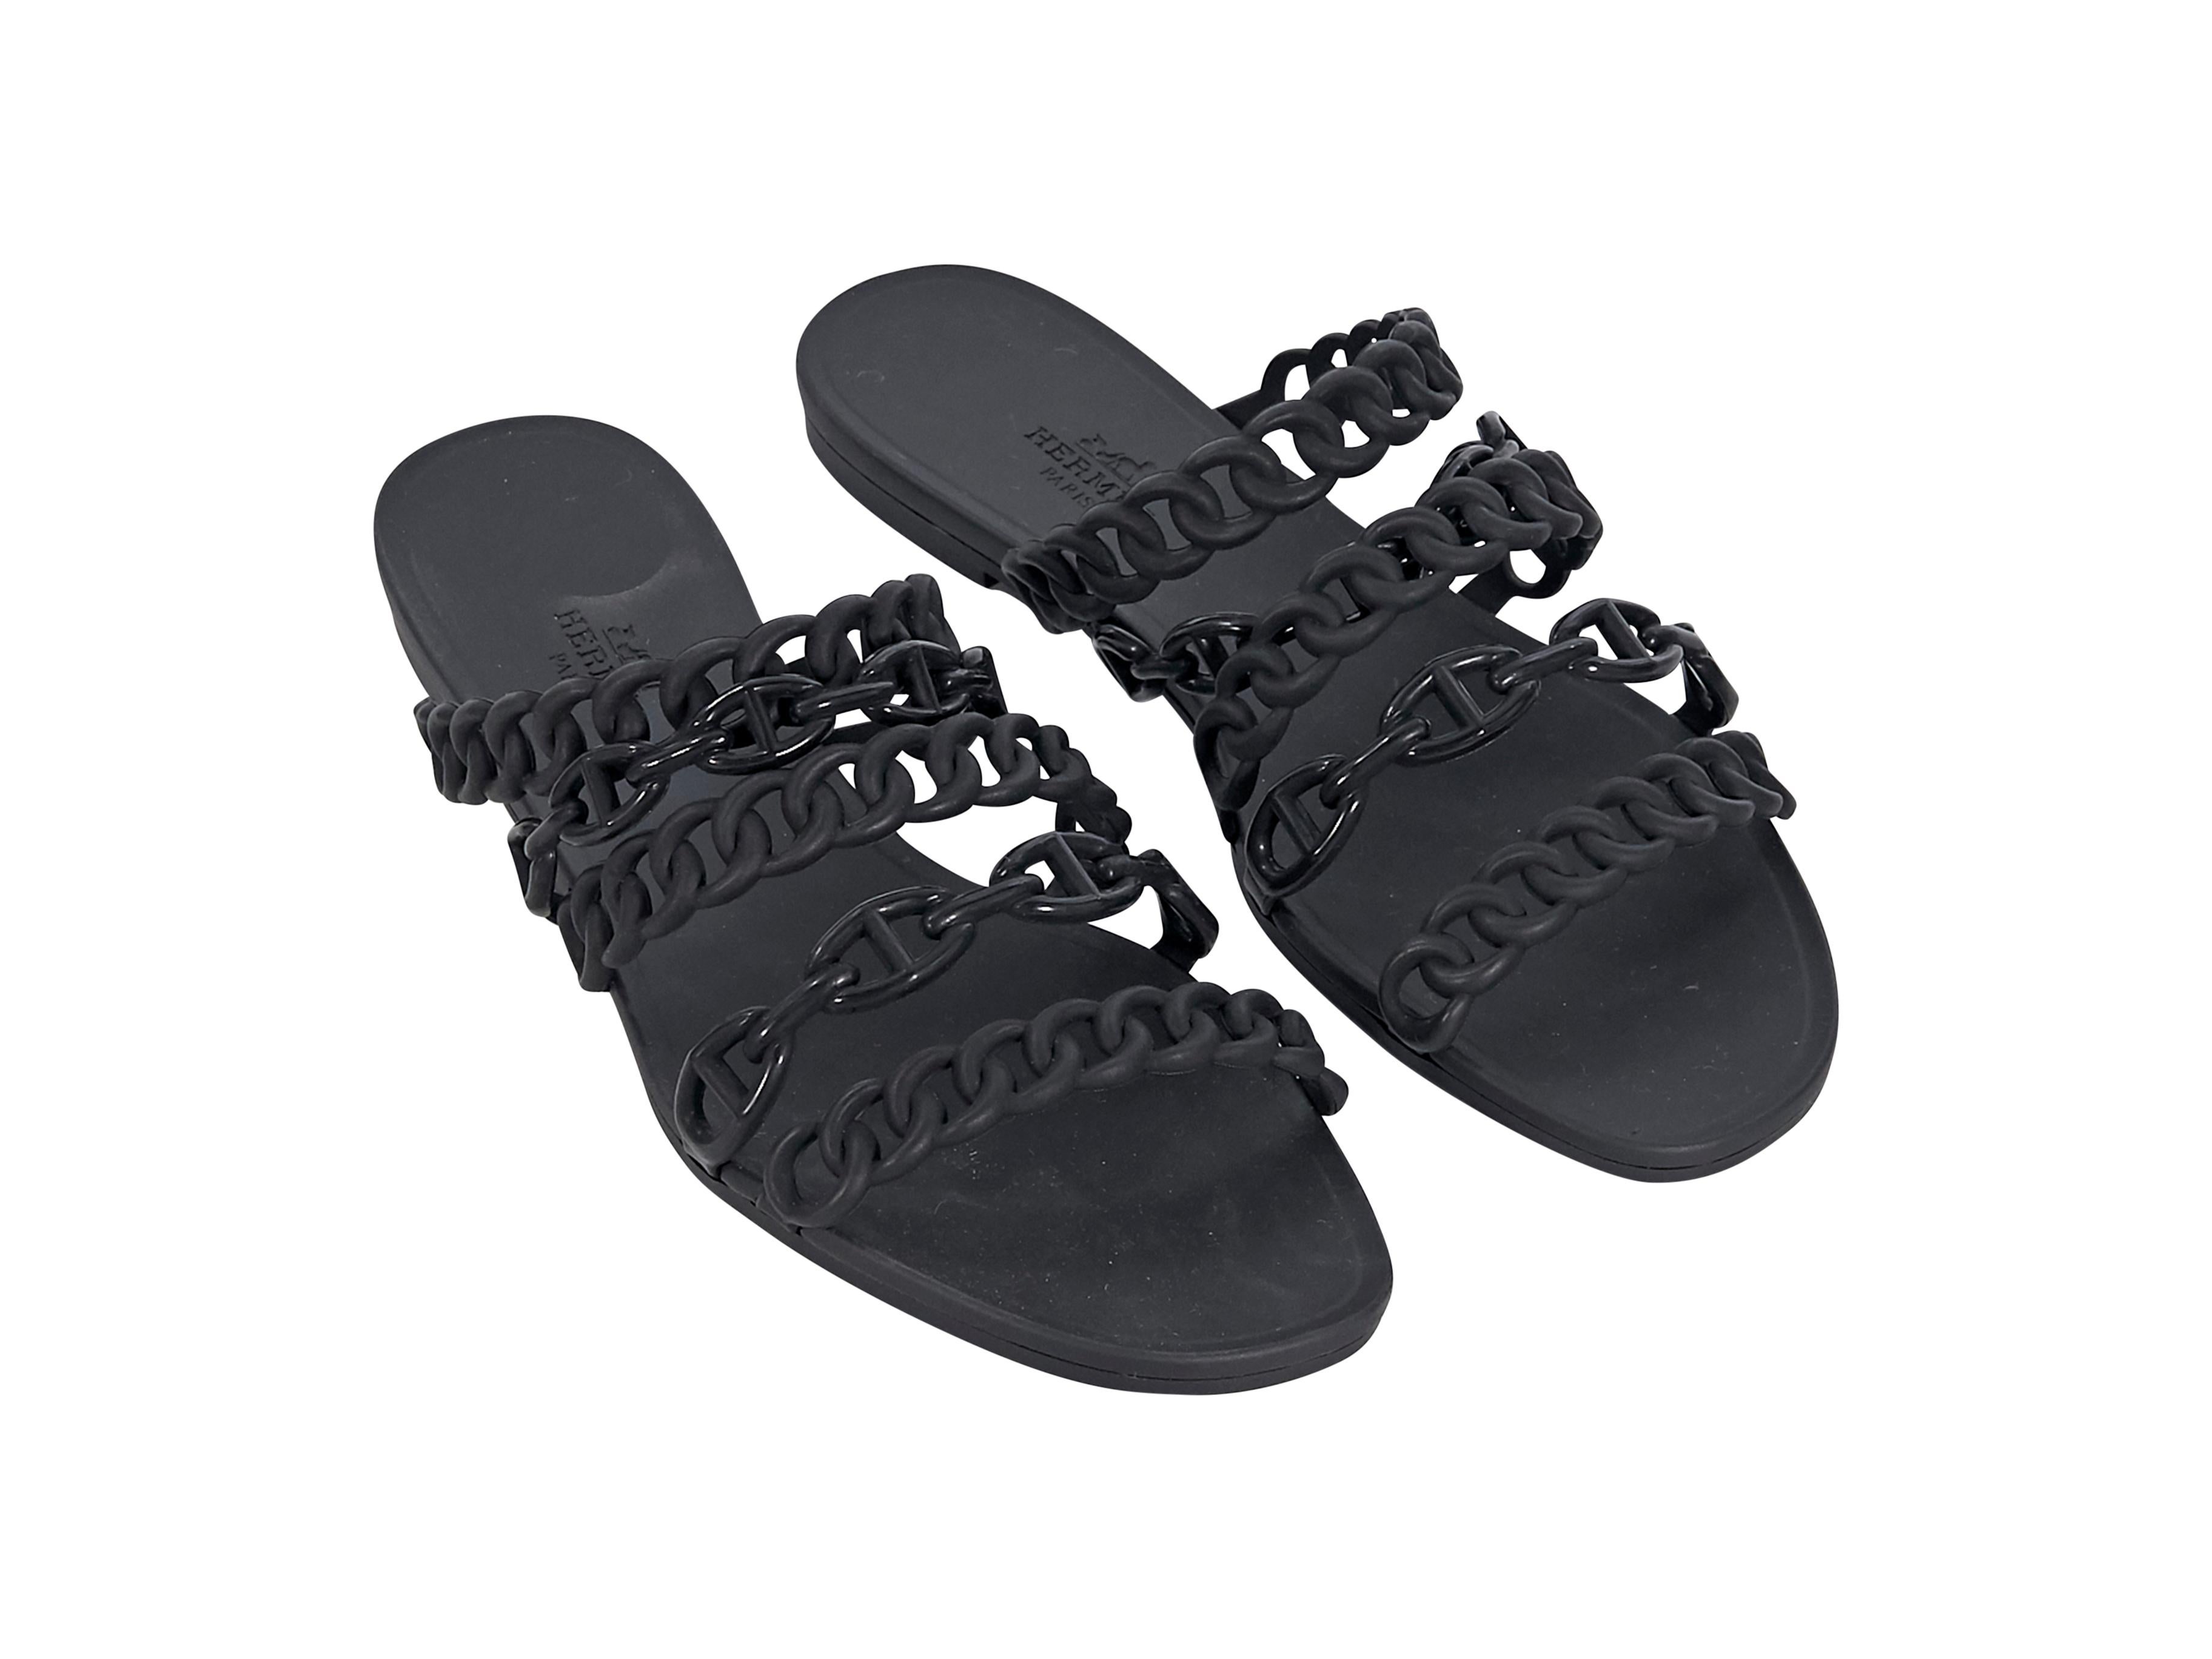 Product details:  Black rubber Chaine d'Ancre sandals by Hermes.  Faux chain straps.  Open toe.  Slide-on style. 
Condition: Pre-owned. Very good.
Est. Retail $ 950.00